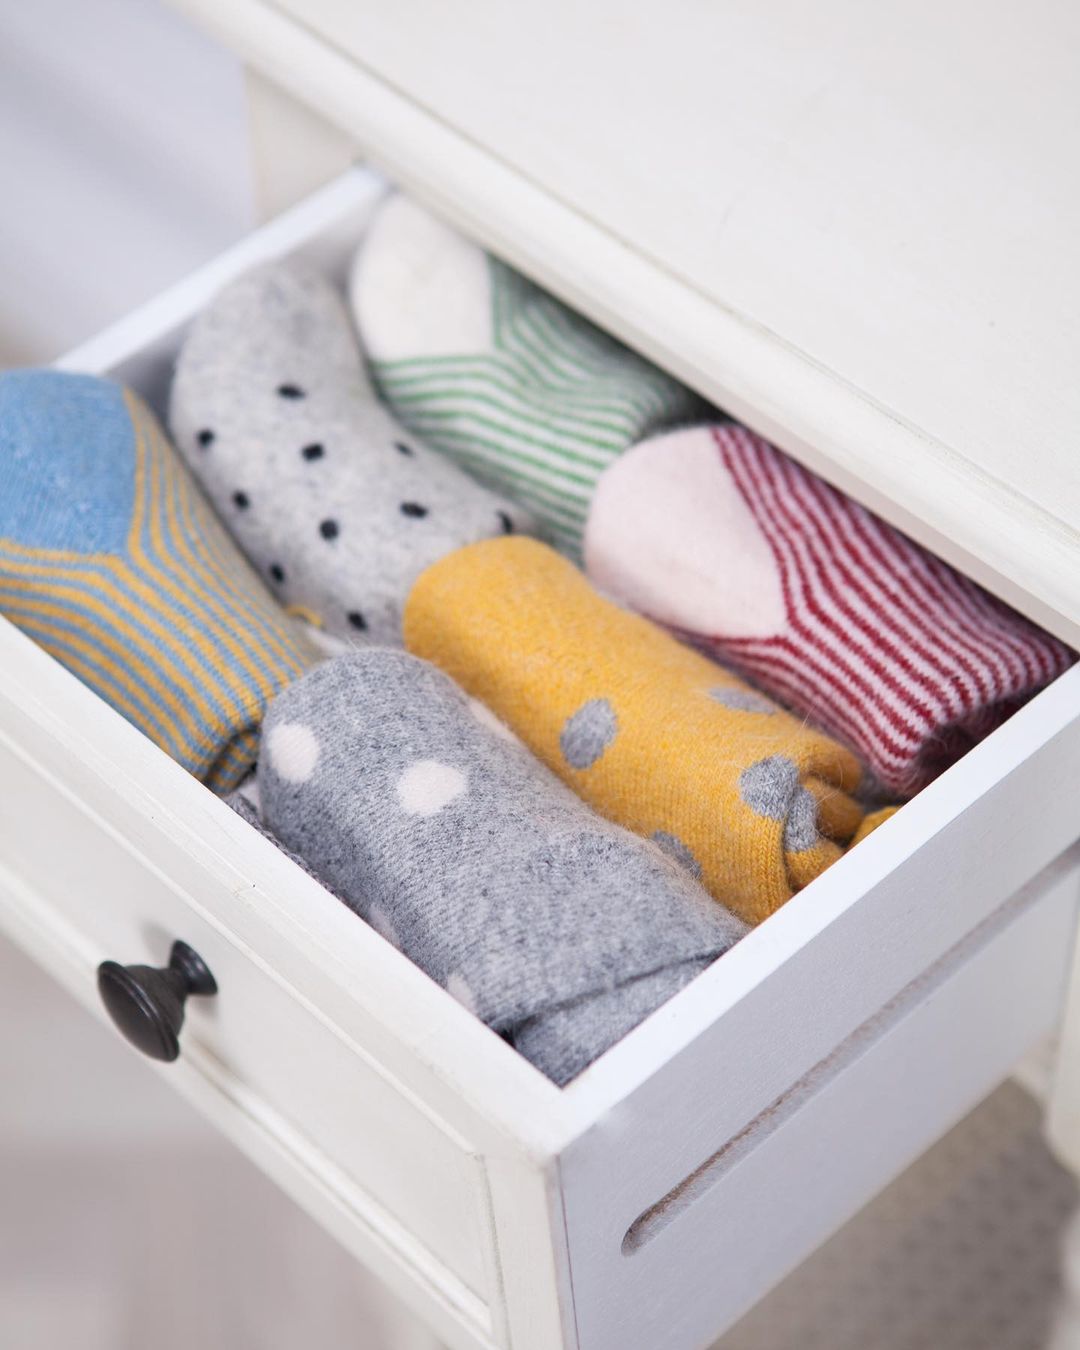 Drawer Pulled Out with Socks Showing. Photo by Instagram user @sueparkinsons